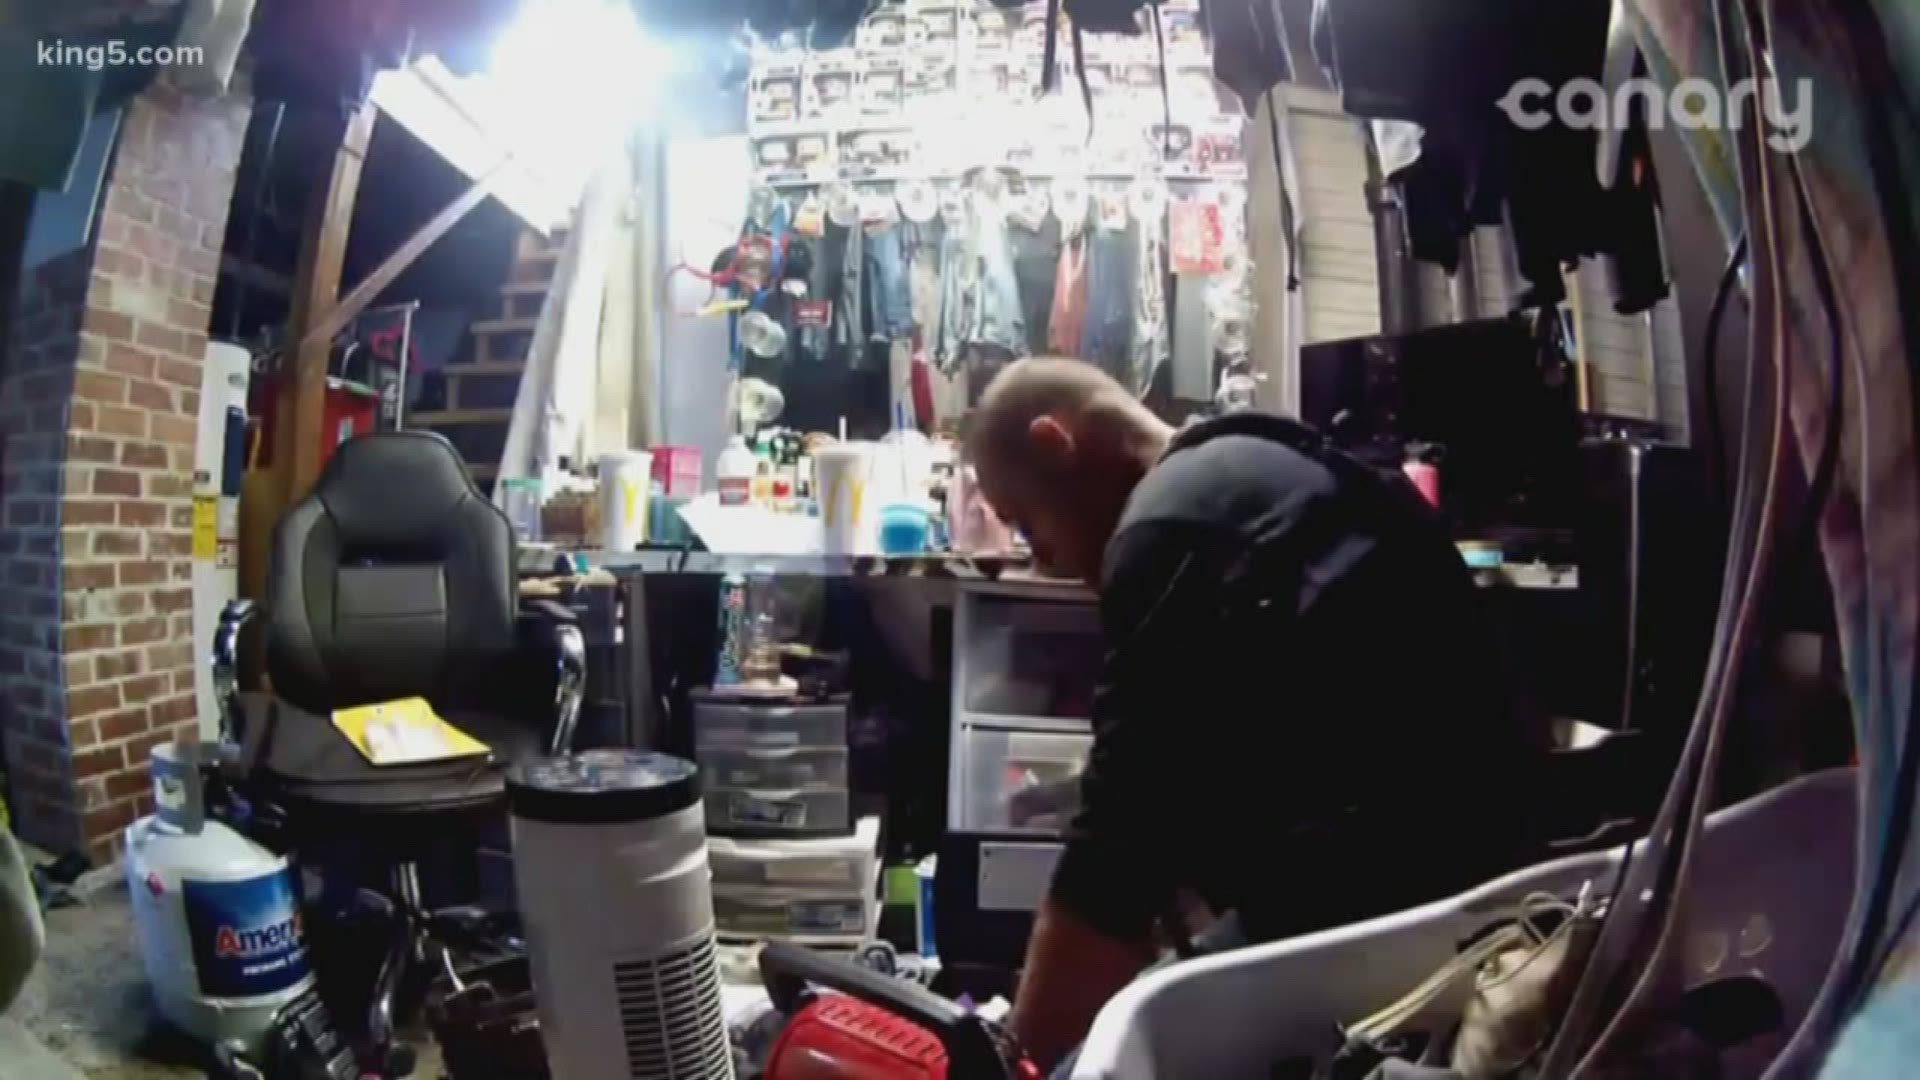 A Bremerton Police detective is out of the job after he was allegedly caught on video stealing from a home while serving a search warrant.